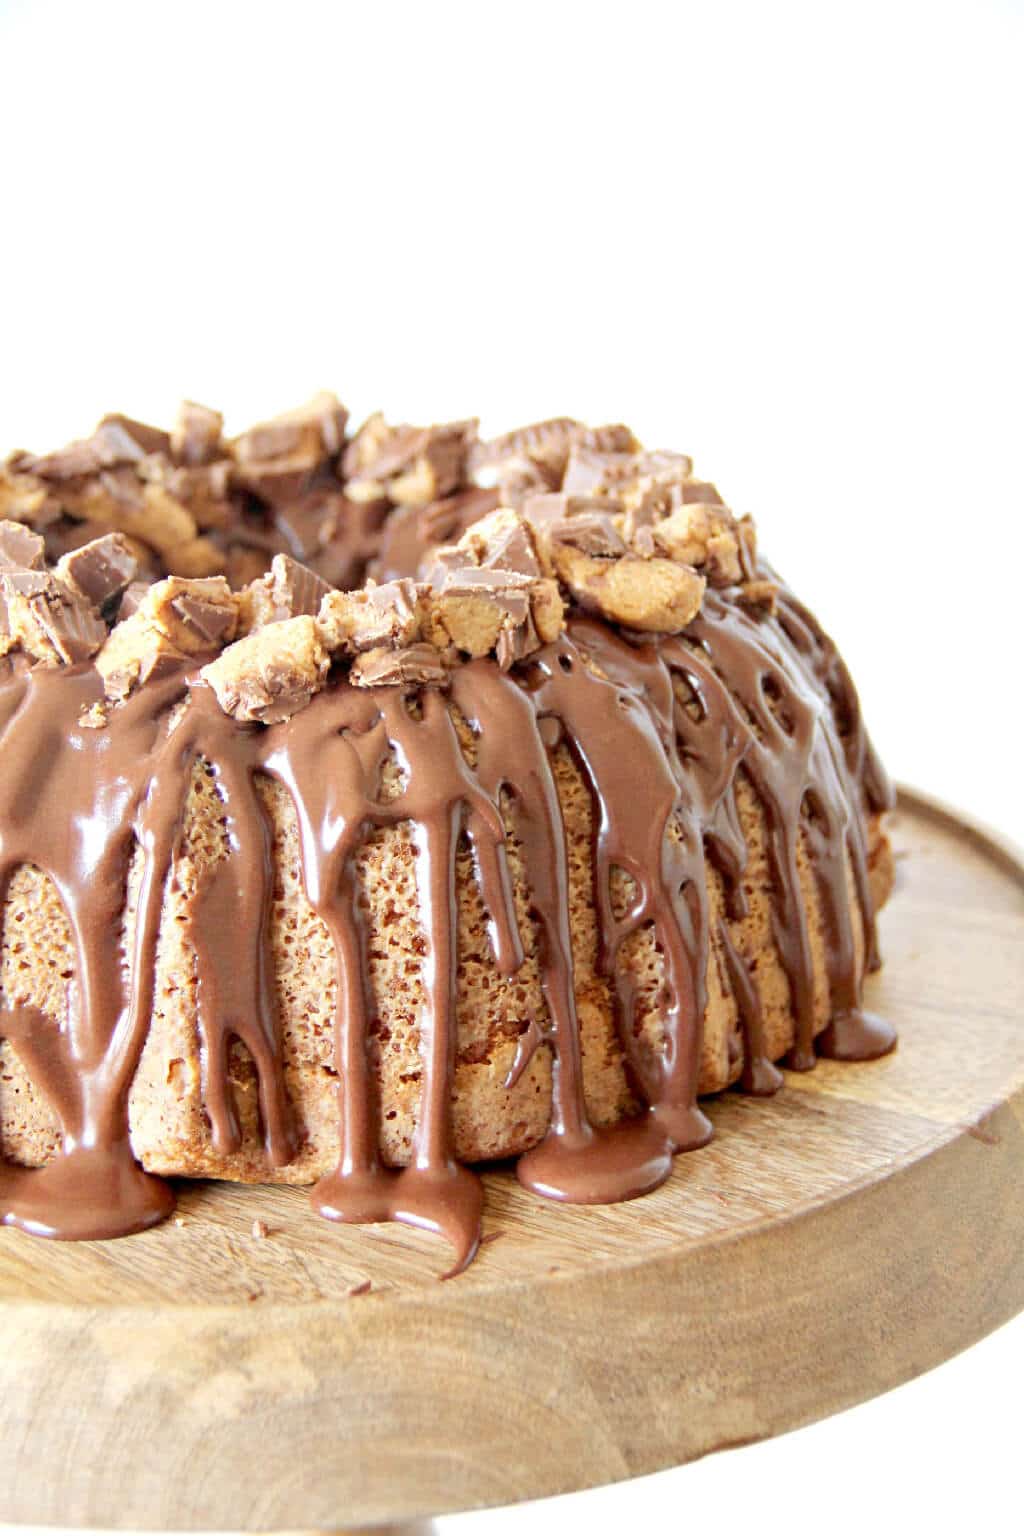 Peanut Butter Pound Cake topped with chocolate glaze and covered in Reese's Peanut Butter Cups.